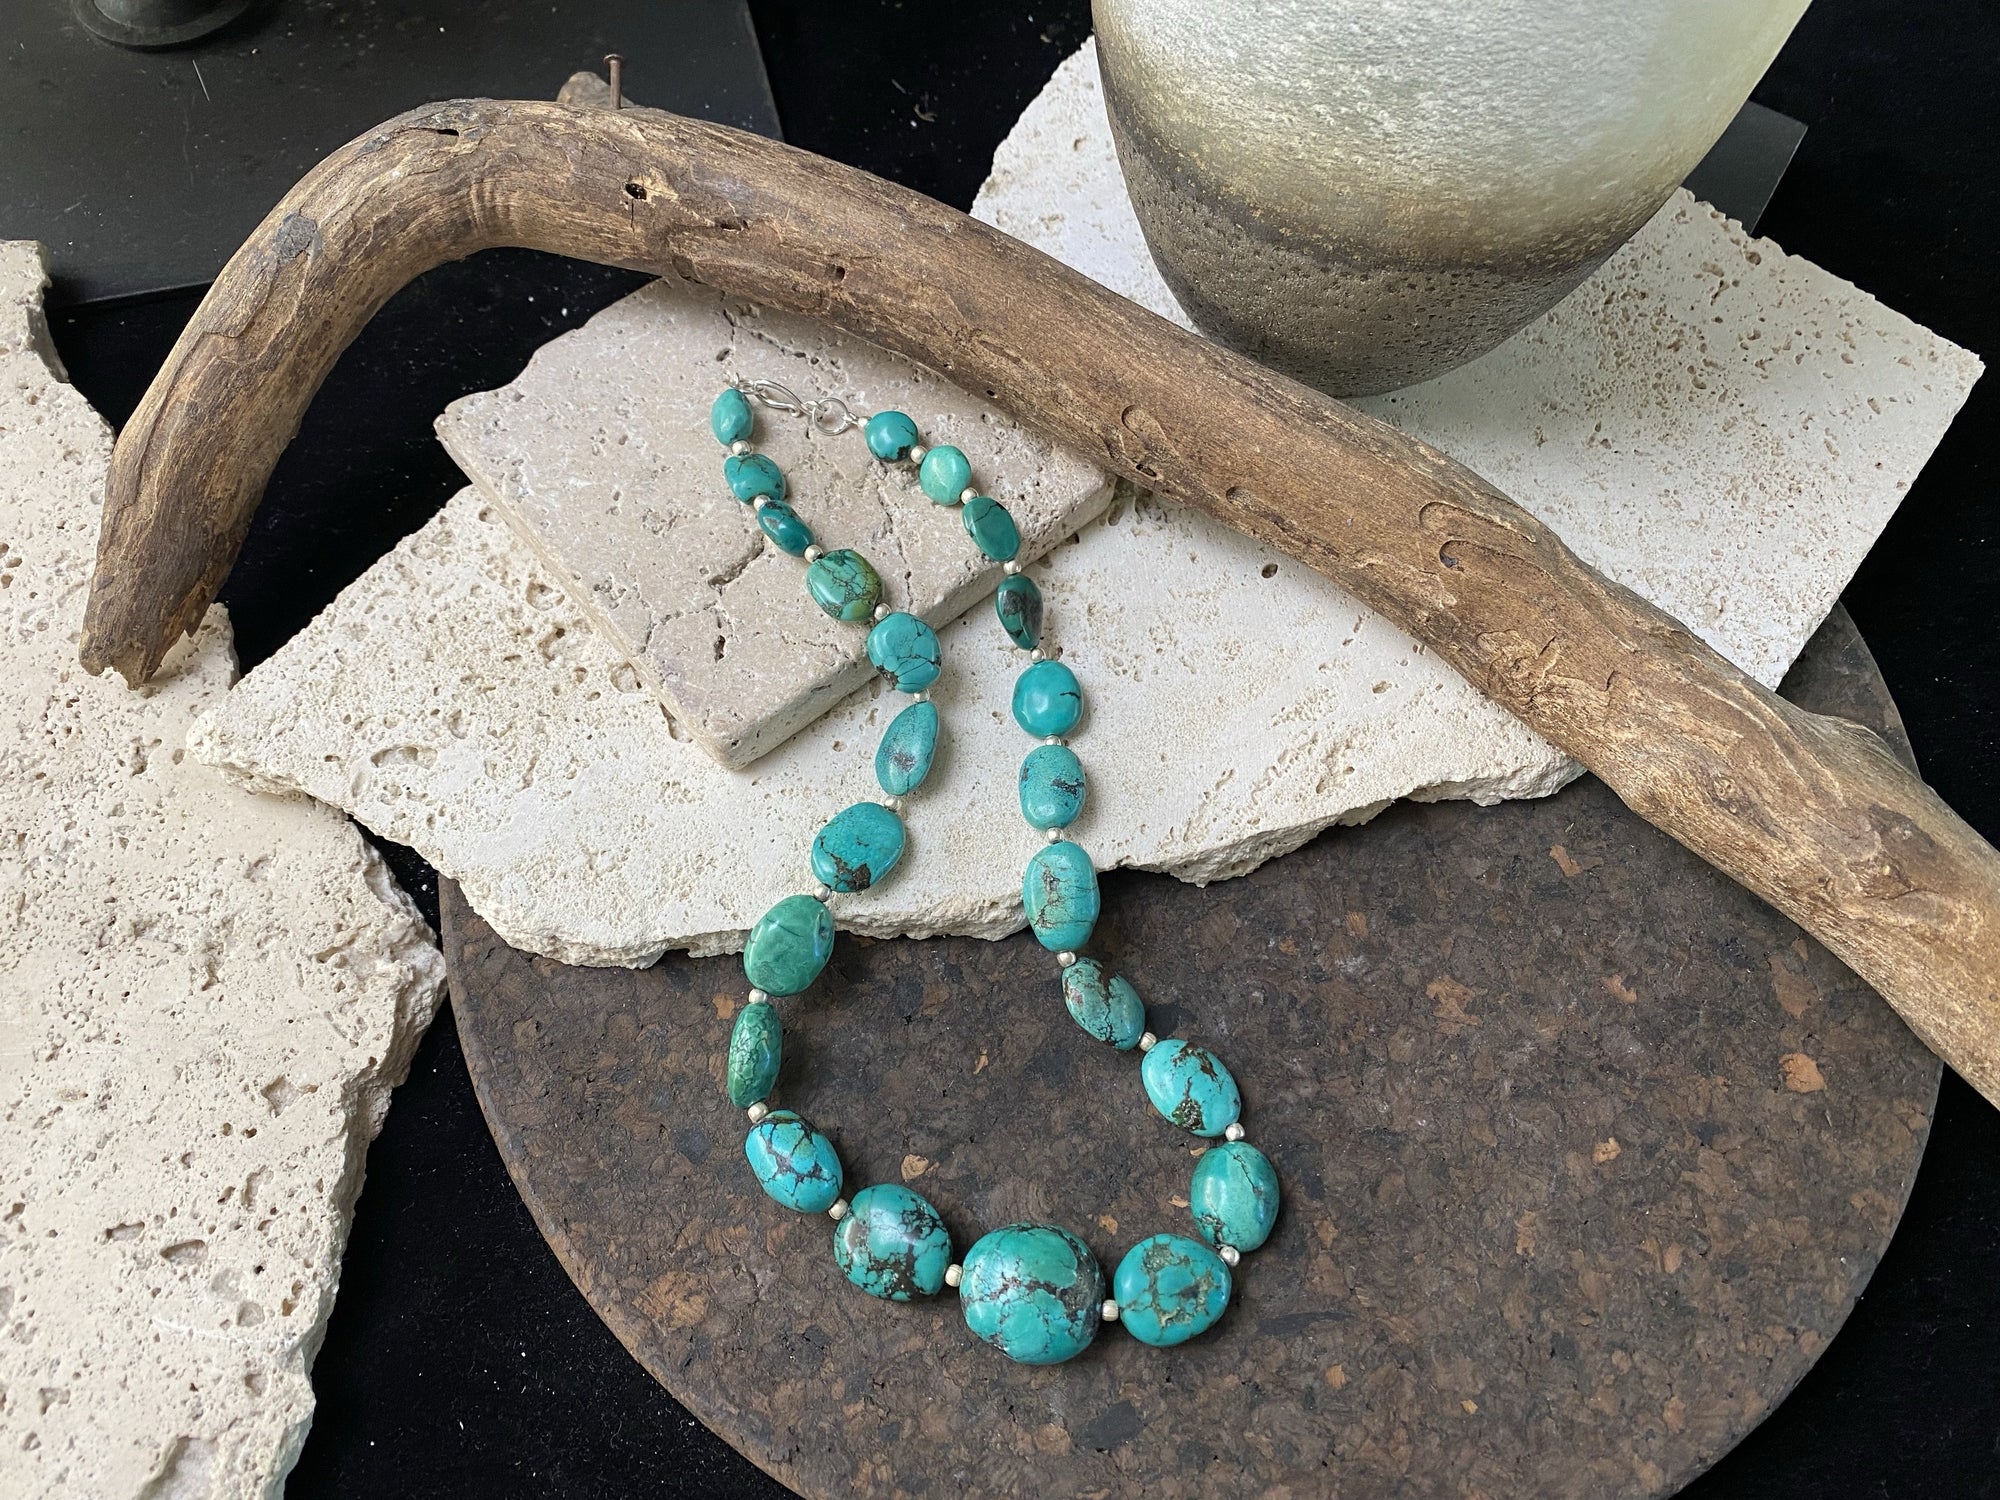 Stunning natural turquoise necklace featuring sterling silver beads and fastening. A unique tribal inspired necklace with a luxurious Boho vibe Measurements: 44 cm length including clasp